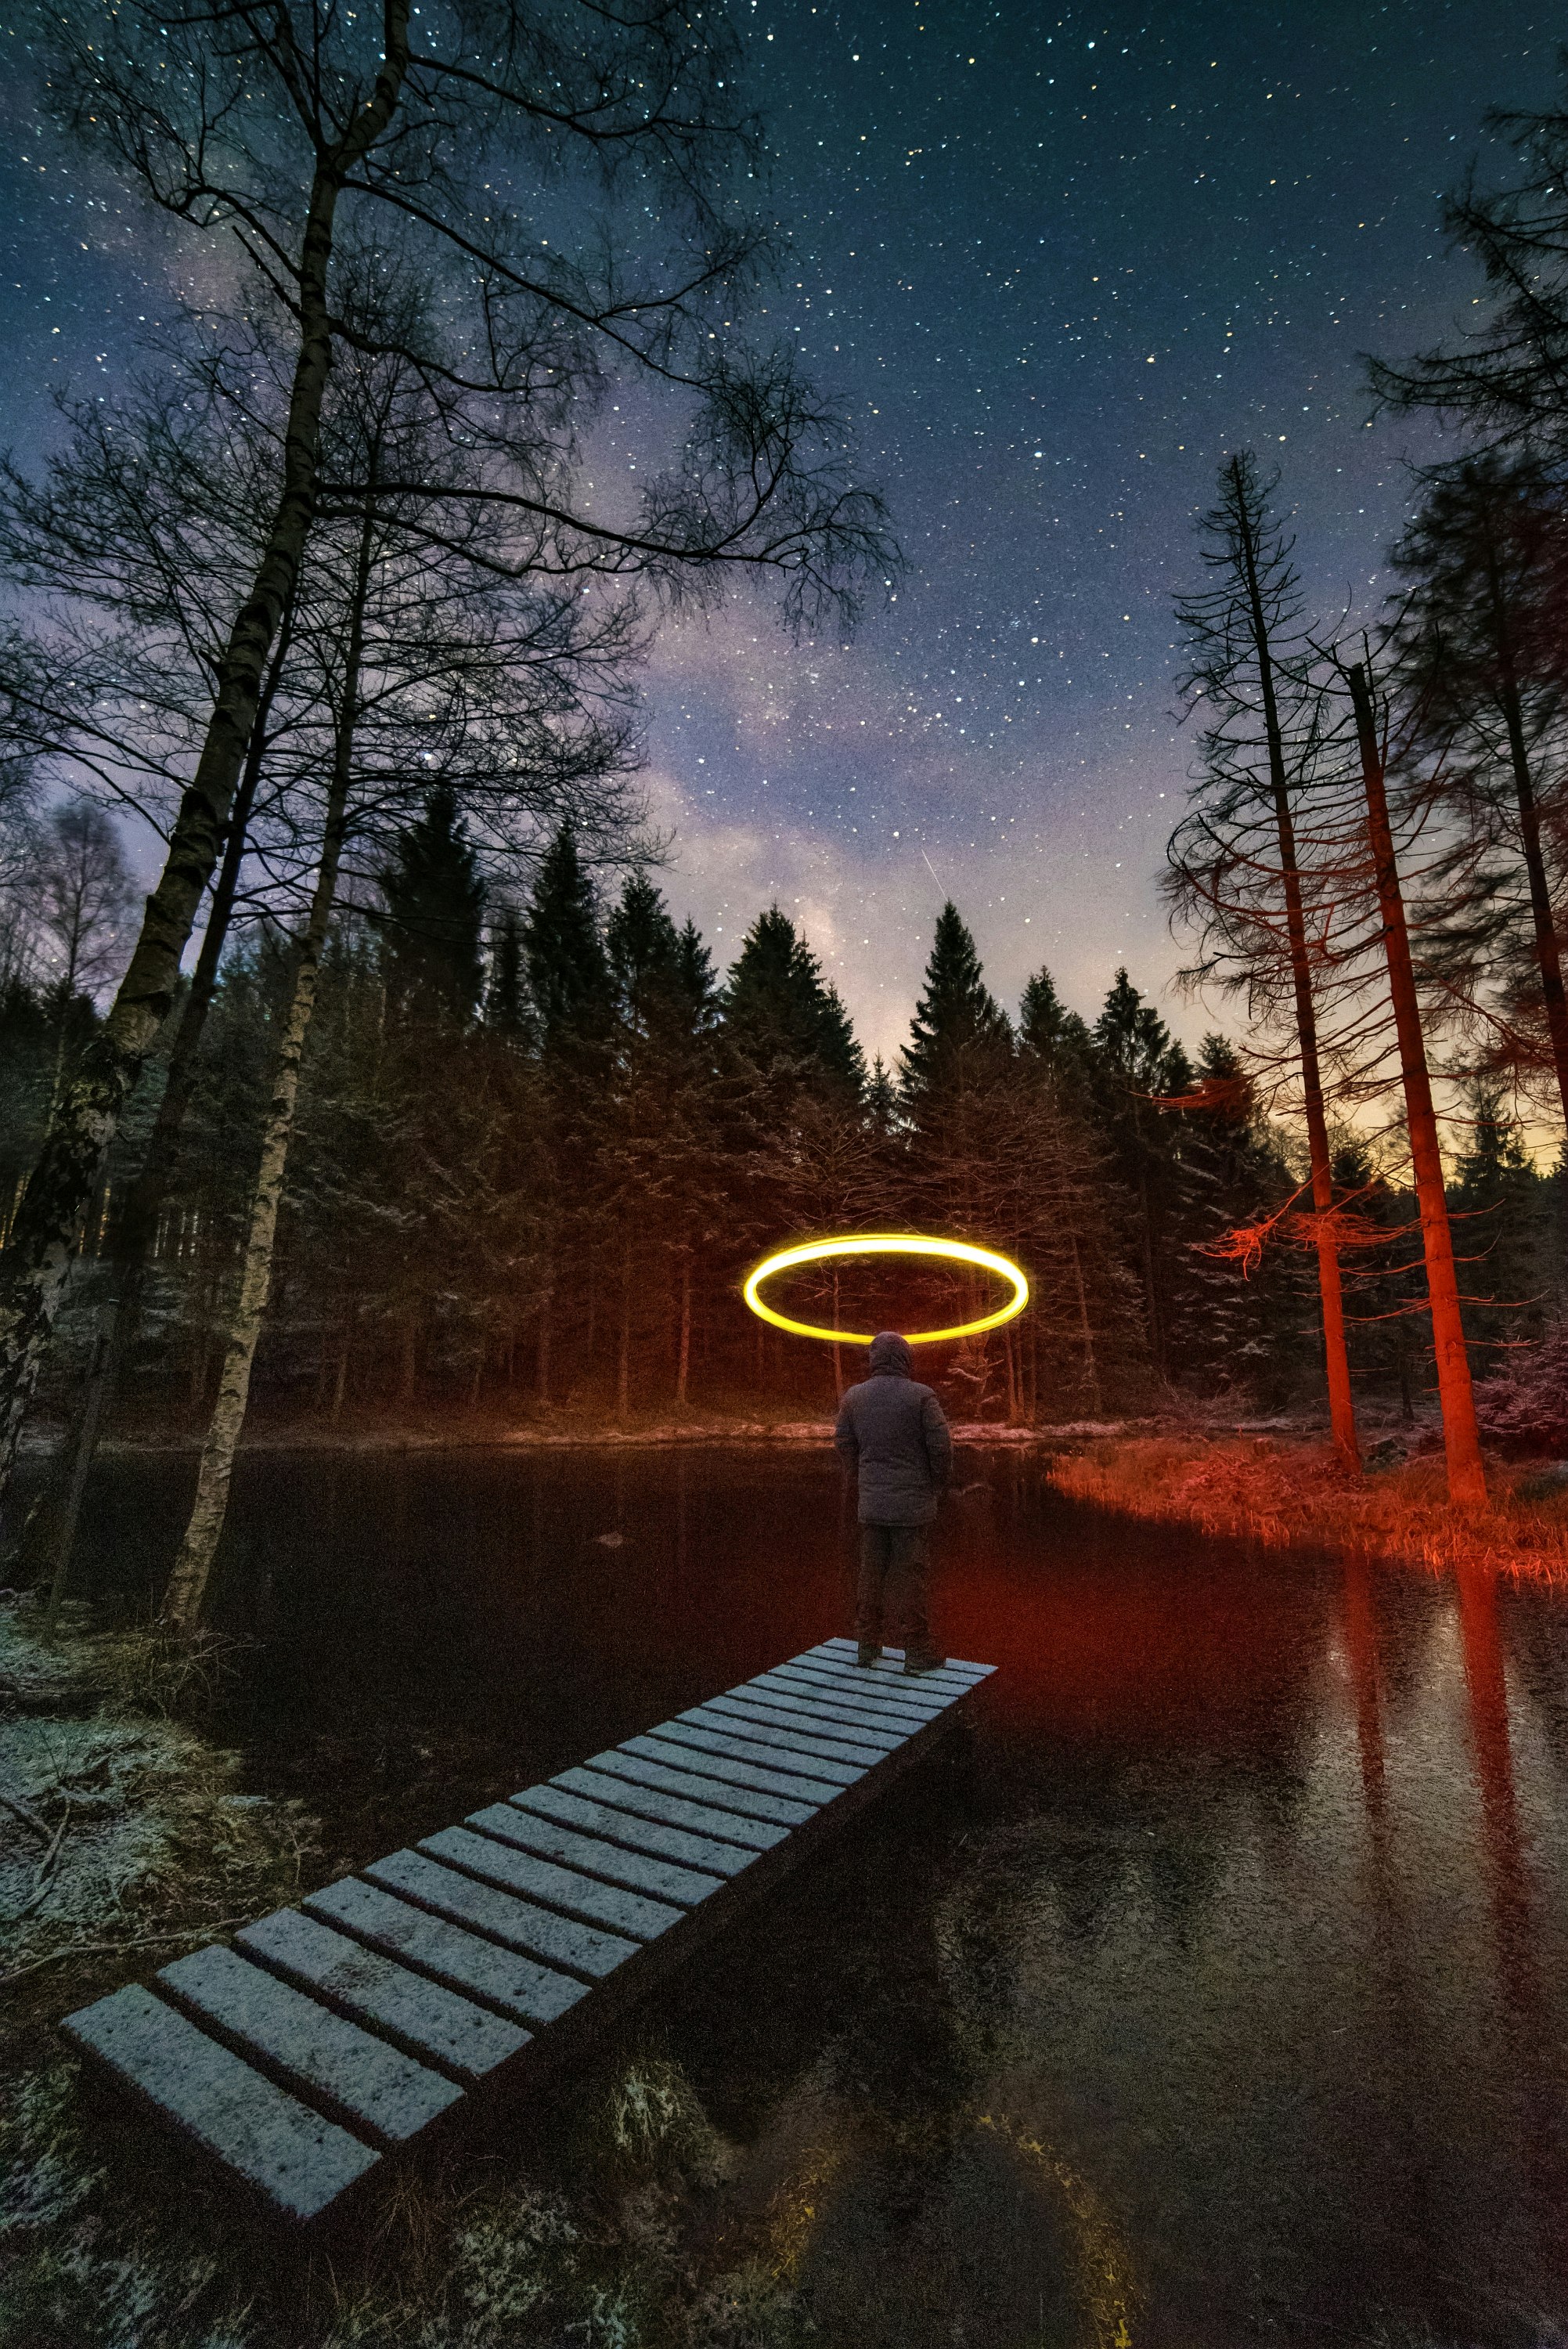 person standing on wooden dock near body of water during night time